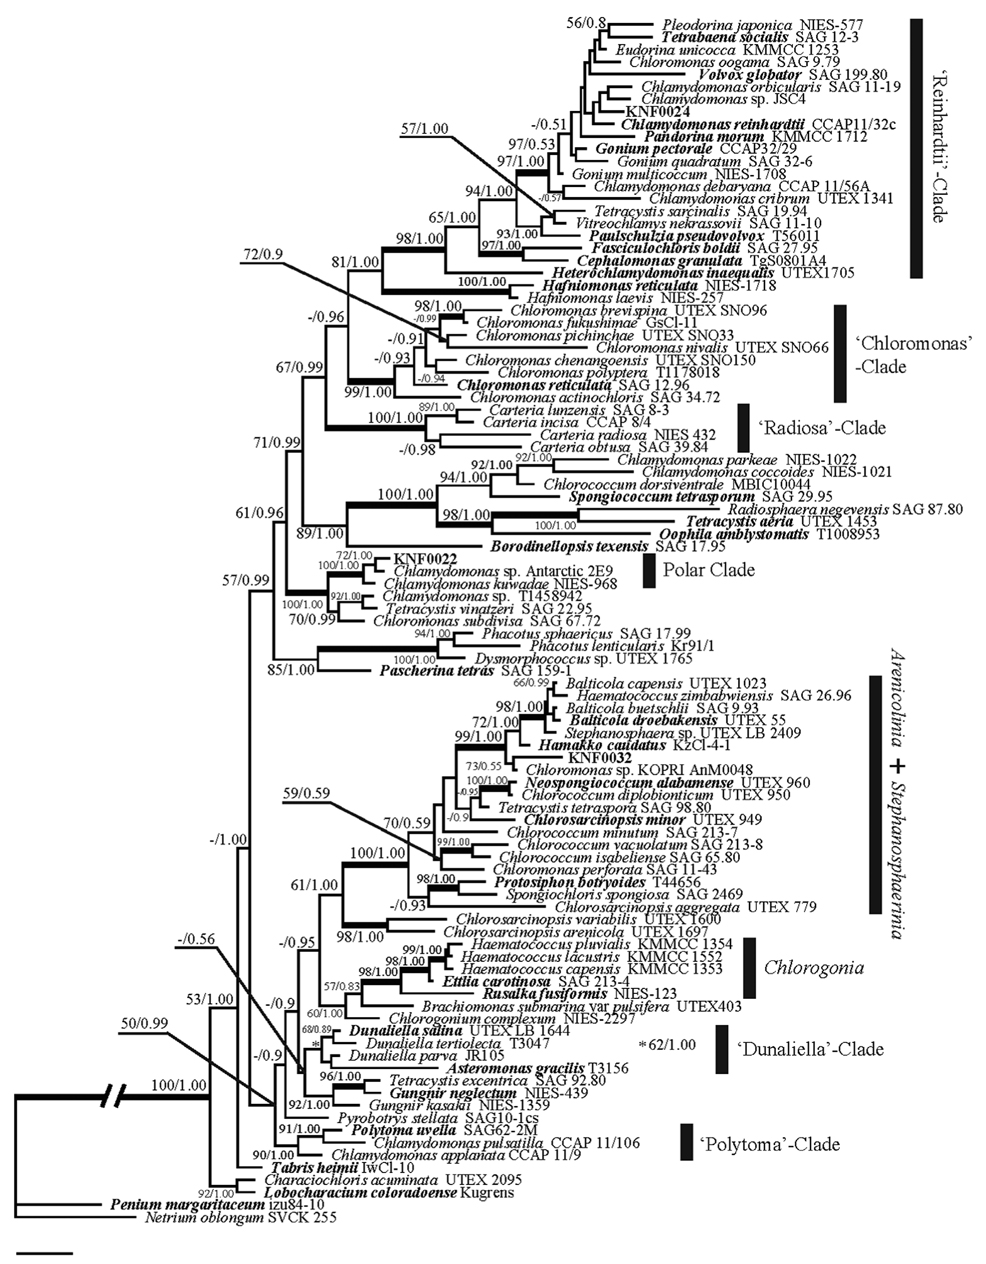 Tree constructed with Bayesian inference using the small subunit sequences of the Arctic green algae KNF0022, KNF0024, KNF0032, and their relatives. Each species with bold characters is the type species of the genus. Values at branches represent 1,000 bootstrap replicates for maximum likelihood analysis (left value) and Bayesian posterior probabilities (right value). Branches marked with bold lines received strong (>95%) support in all analyses, whereas those lacking values received less than 50% support. Scale bars represent: 0.01 substitutions / site.